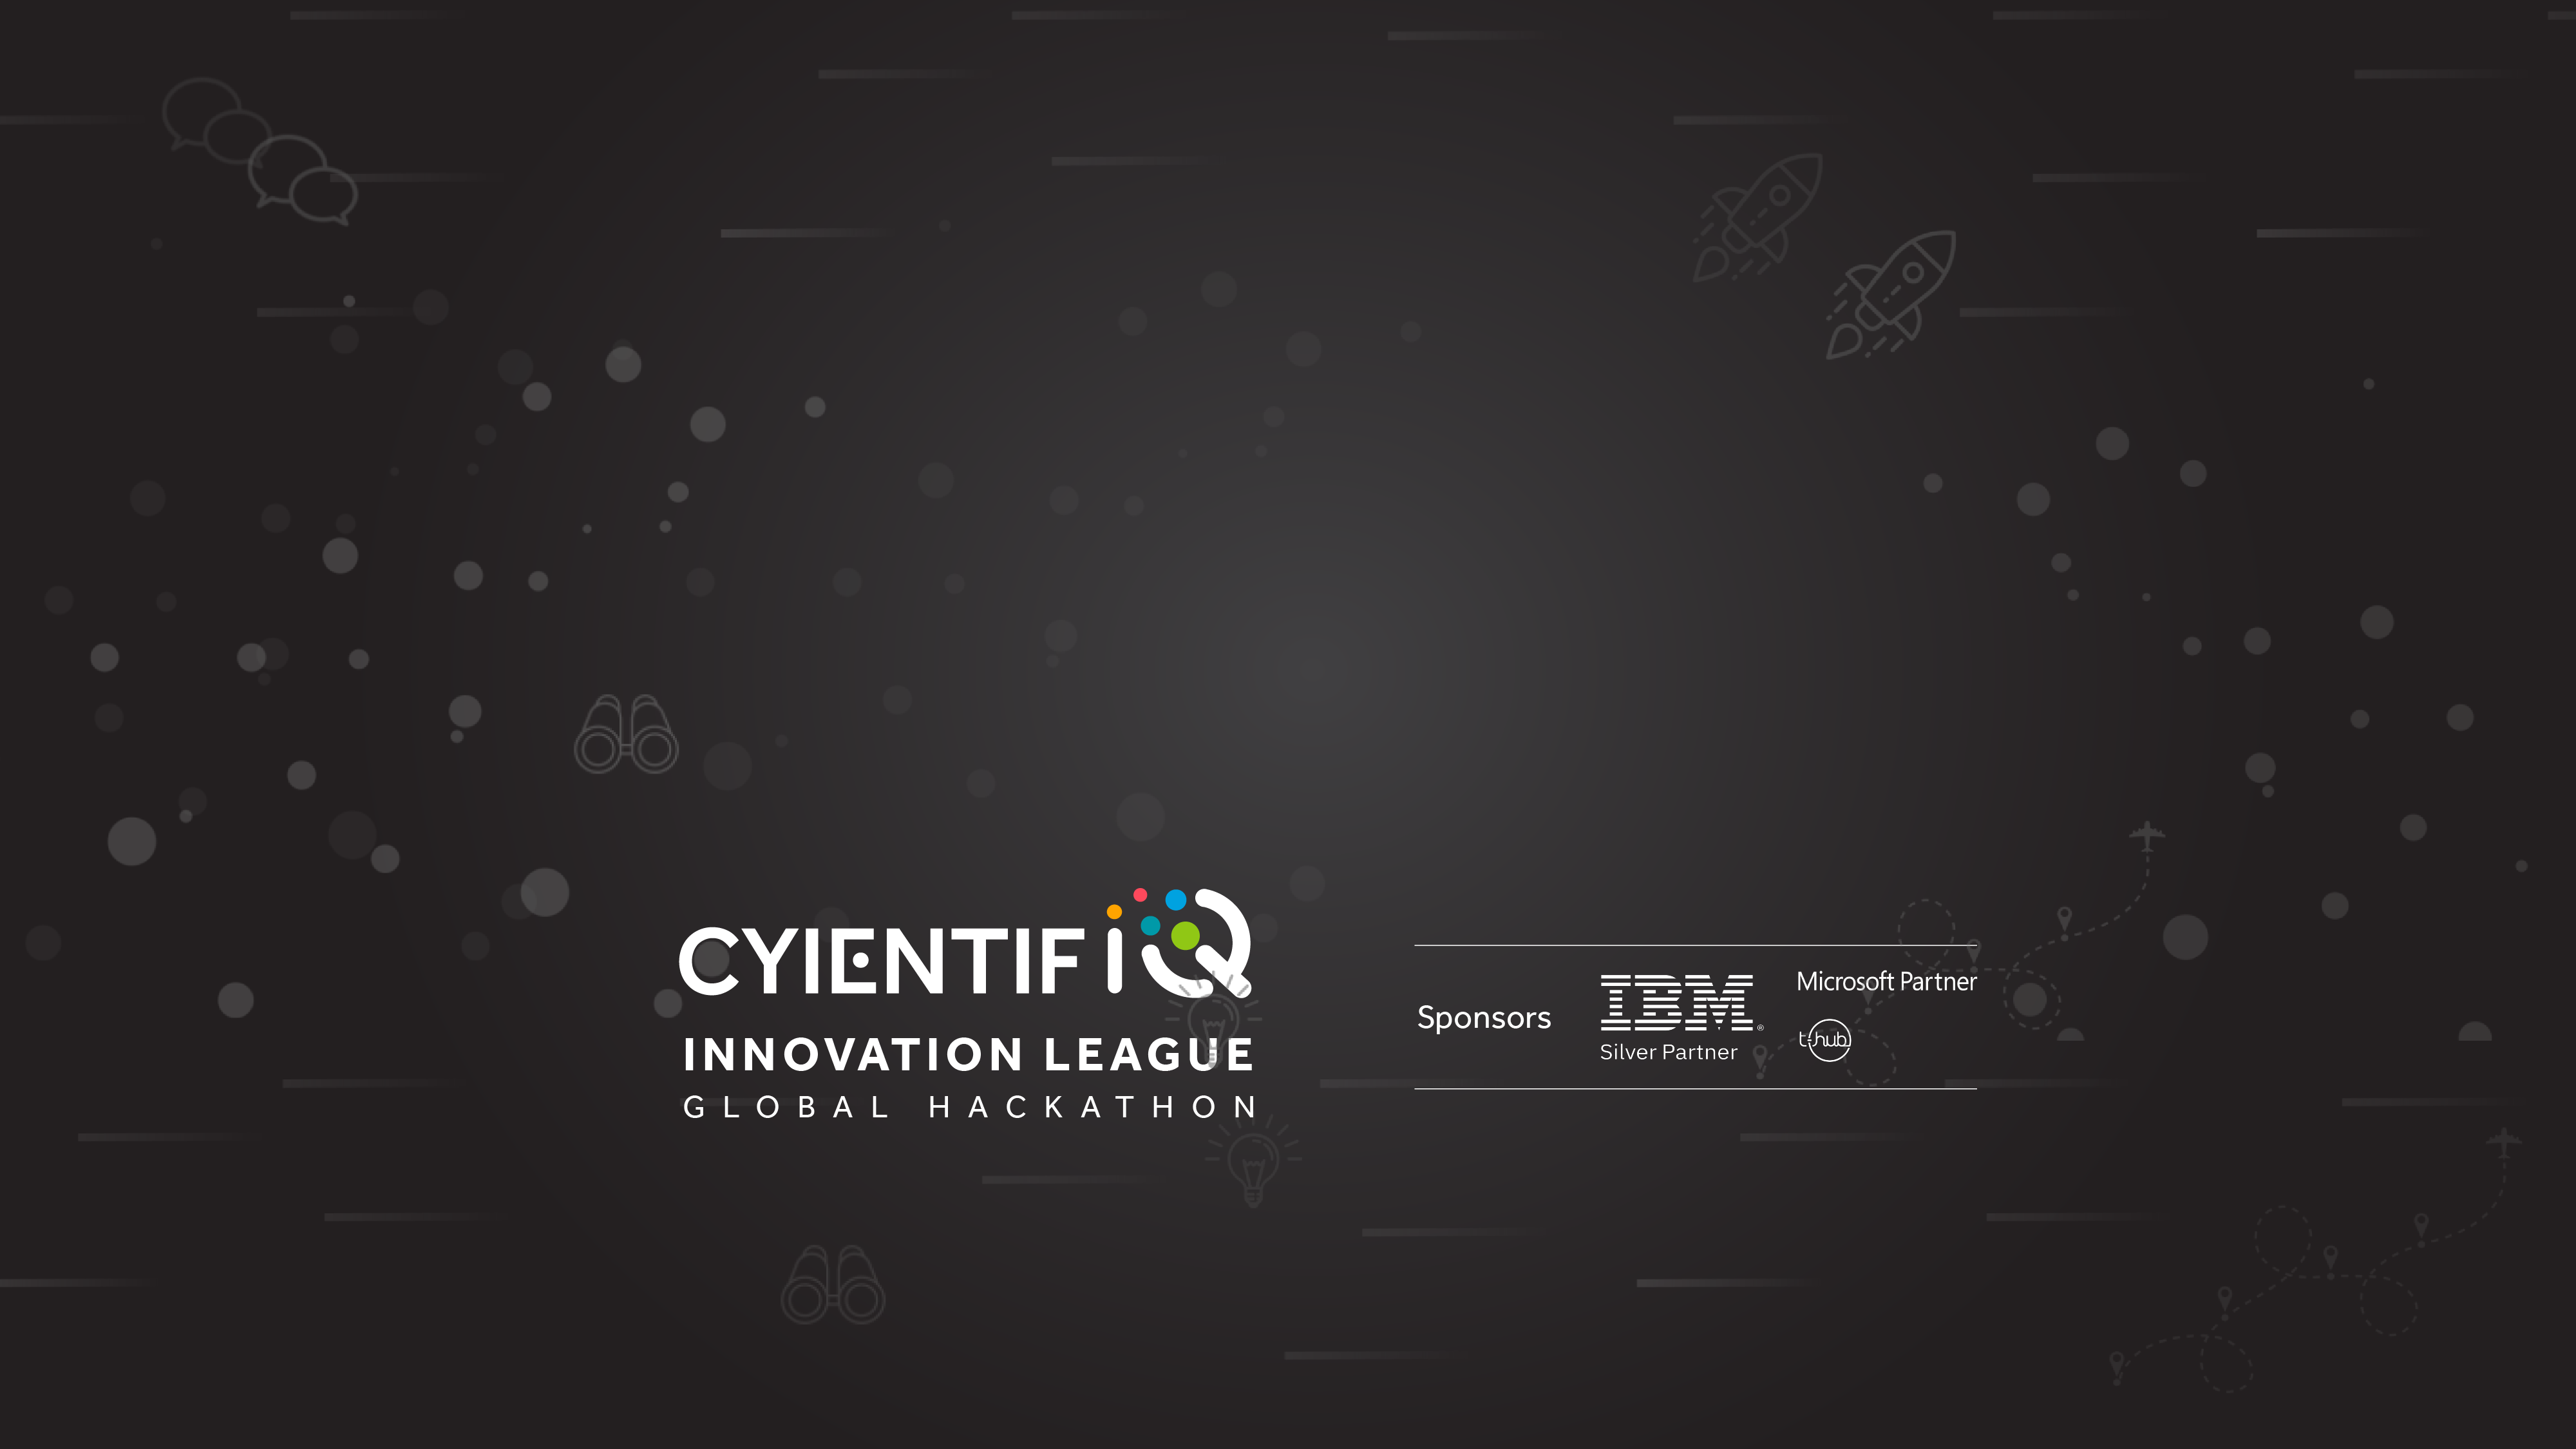 Cyient celebrates innovation with 5500 innovators across 76 countries collaborating for CyientifIQ Innovation League